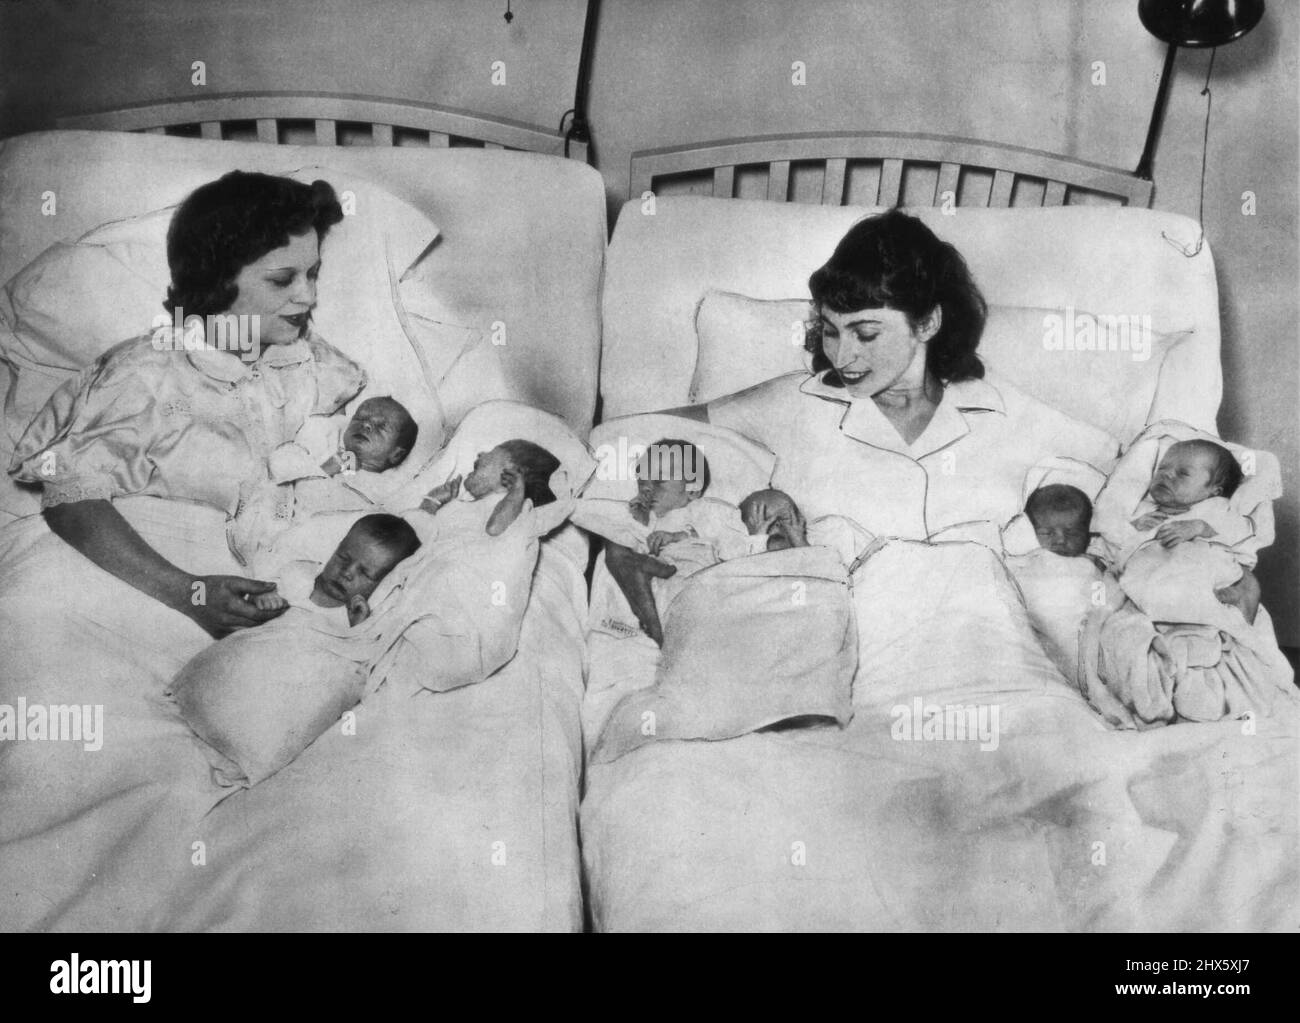 Triplets Meet Quadruplets - Two mothers and their seven babies presented this unusual scene in Sloane Hospital today as Mrs. Muriel Bachant (left) and her triplets, born March 30, and their picture taken Alongside Mrs. Harry Zarief and her quadruplets, born March 29. The left-to-right on the babies in this exclusive picture taken by the New York Daily News is as follows: Nancy Sue, Janet Lee and Karen Ann Bachant Stock Photo